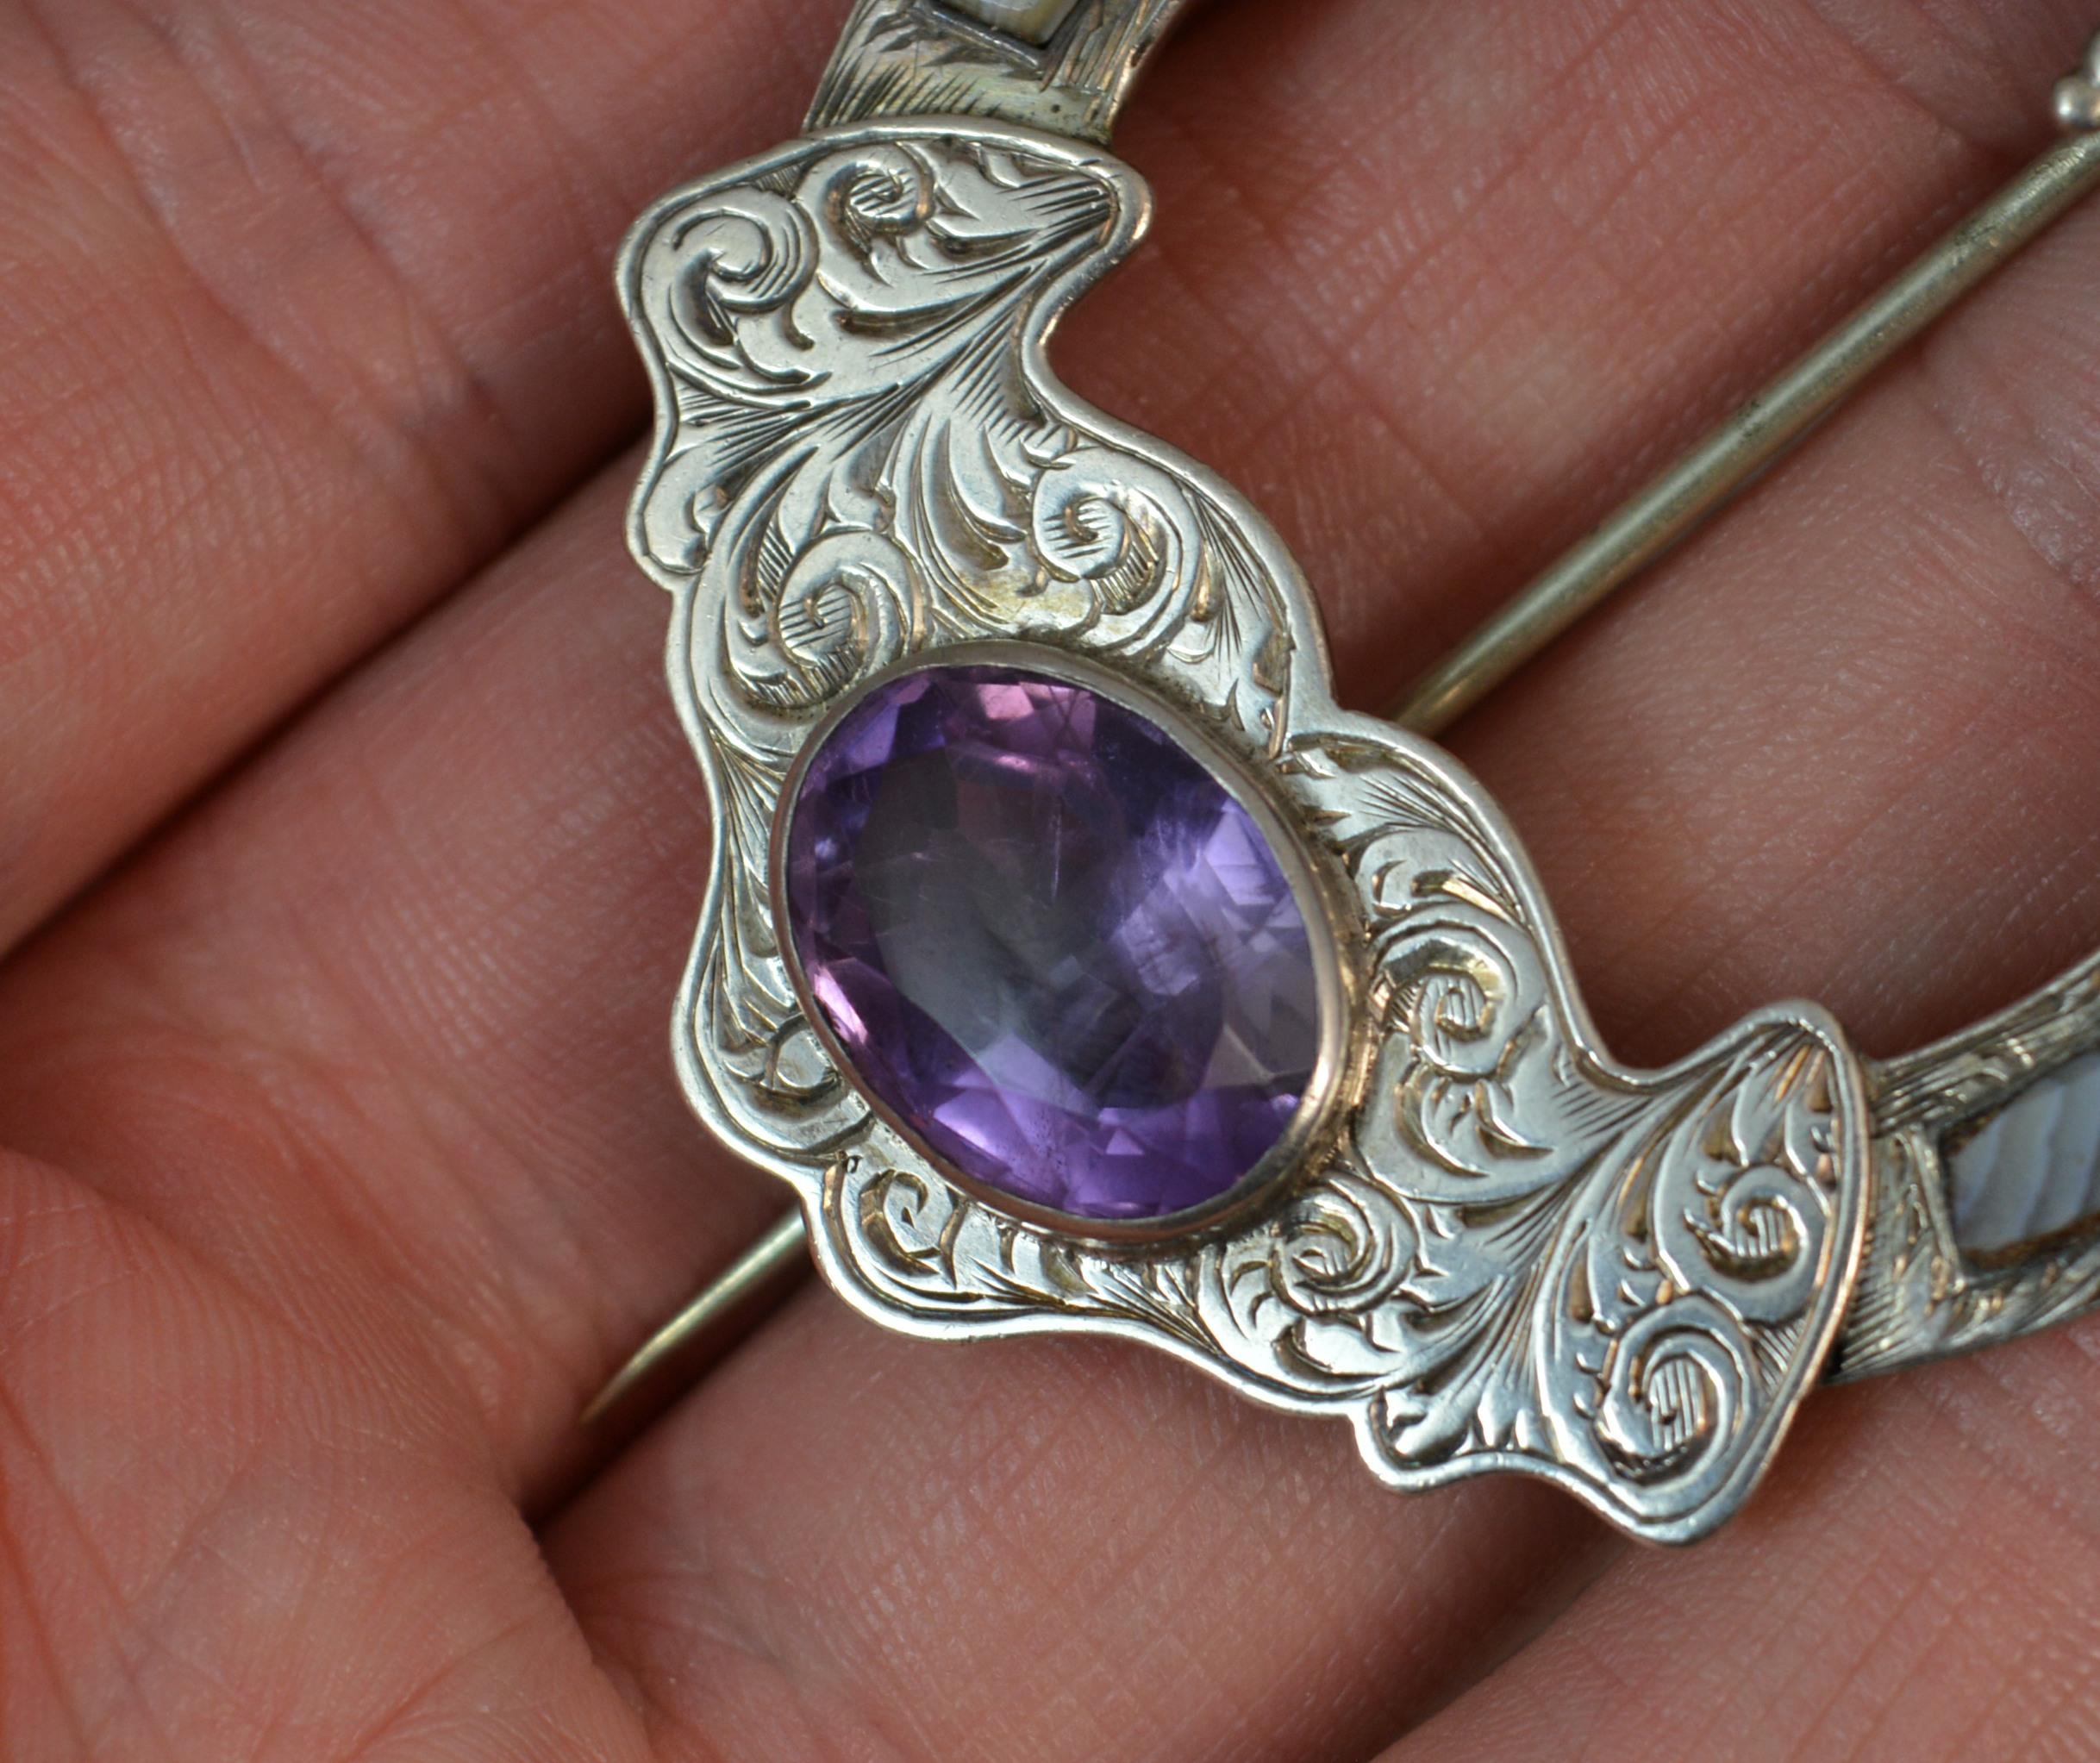 A beautiful antique silver, agate and amethyst brooch.
Scottish origin.
Fine engraved floral pattern to silver.
Stylish shape.

Hallmarks ; n/a
Weight ; 15.1 grams
Size ; 44mm x 62mm approx
Condition ; Very good. Working pin and hinge. Securely set